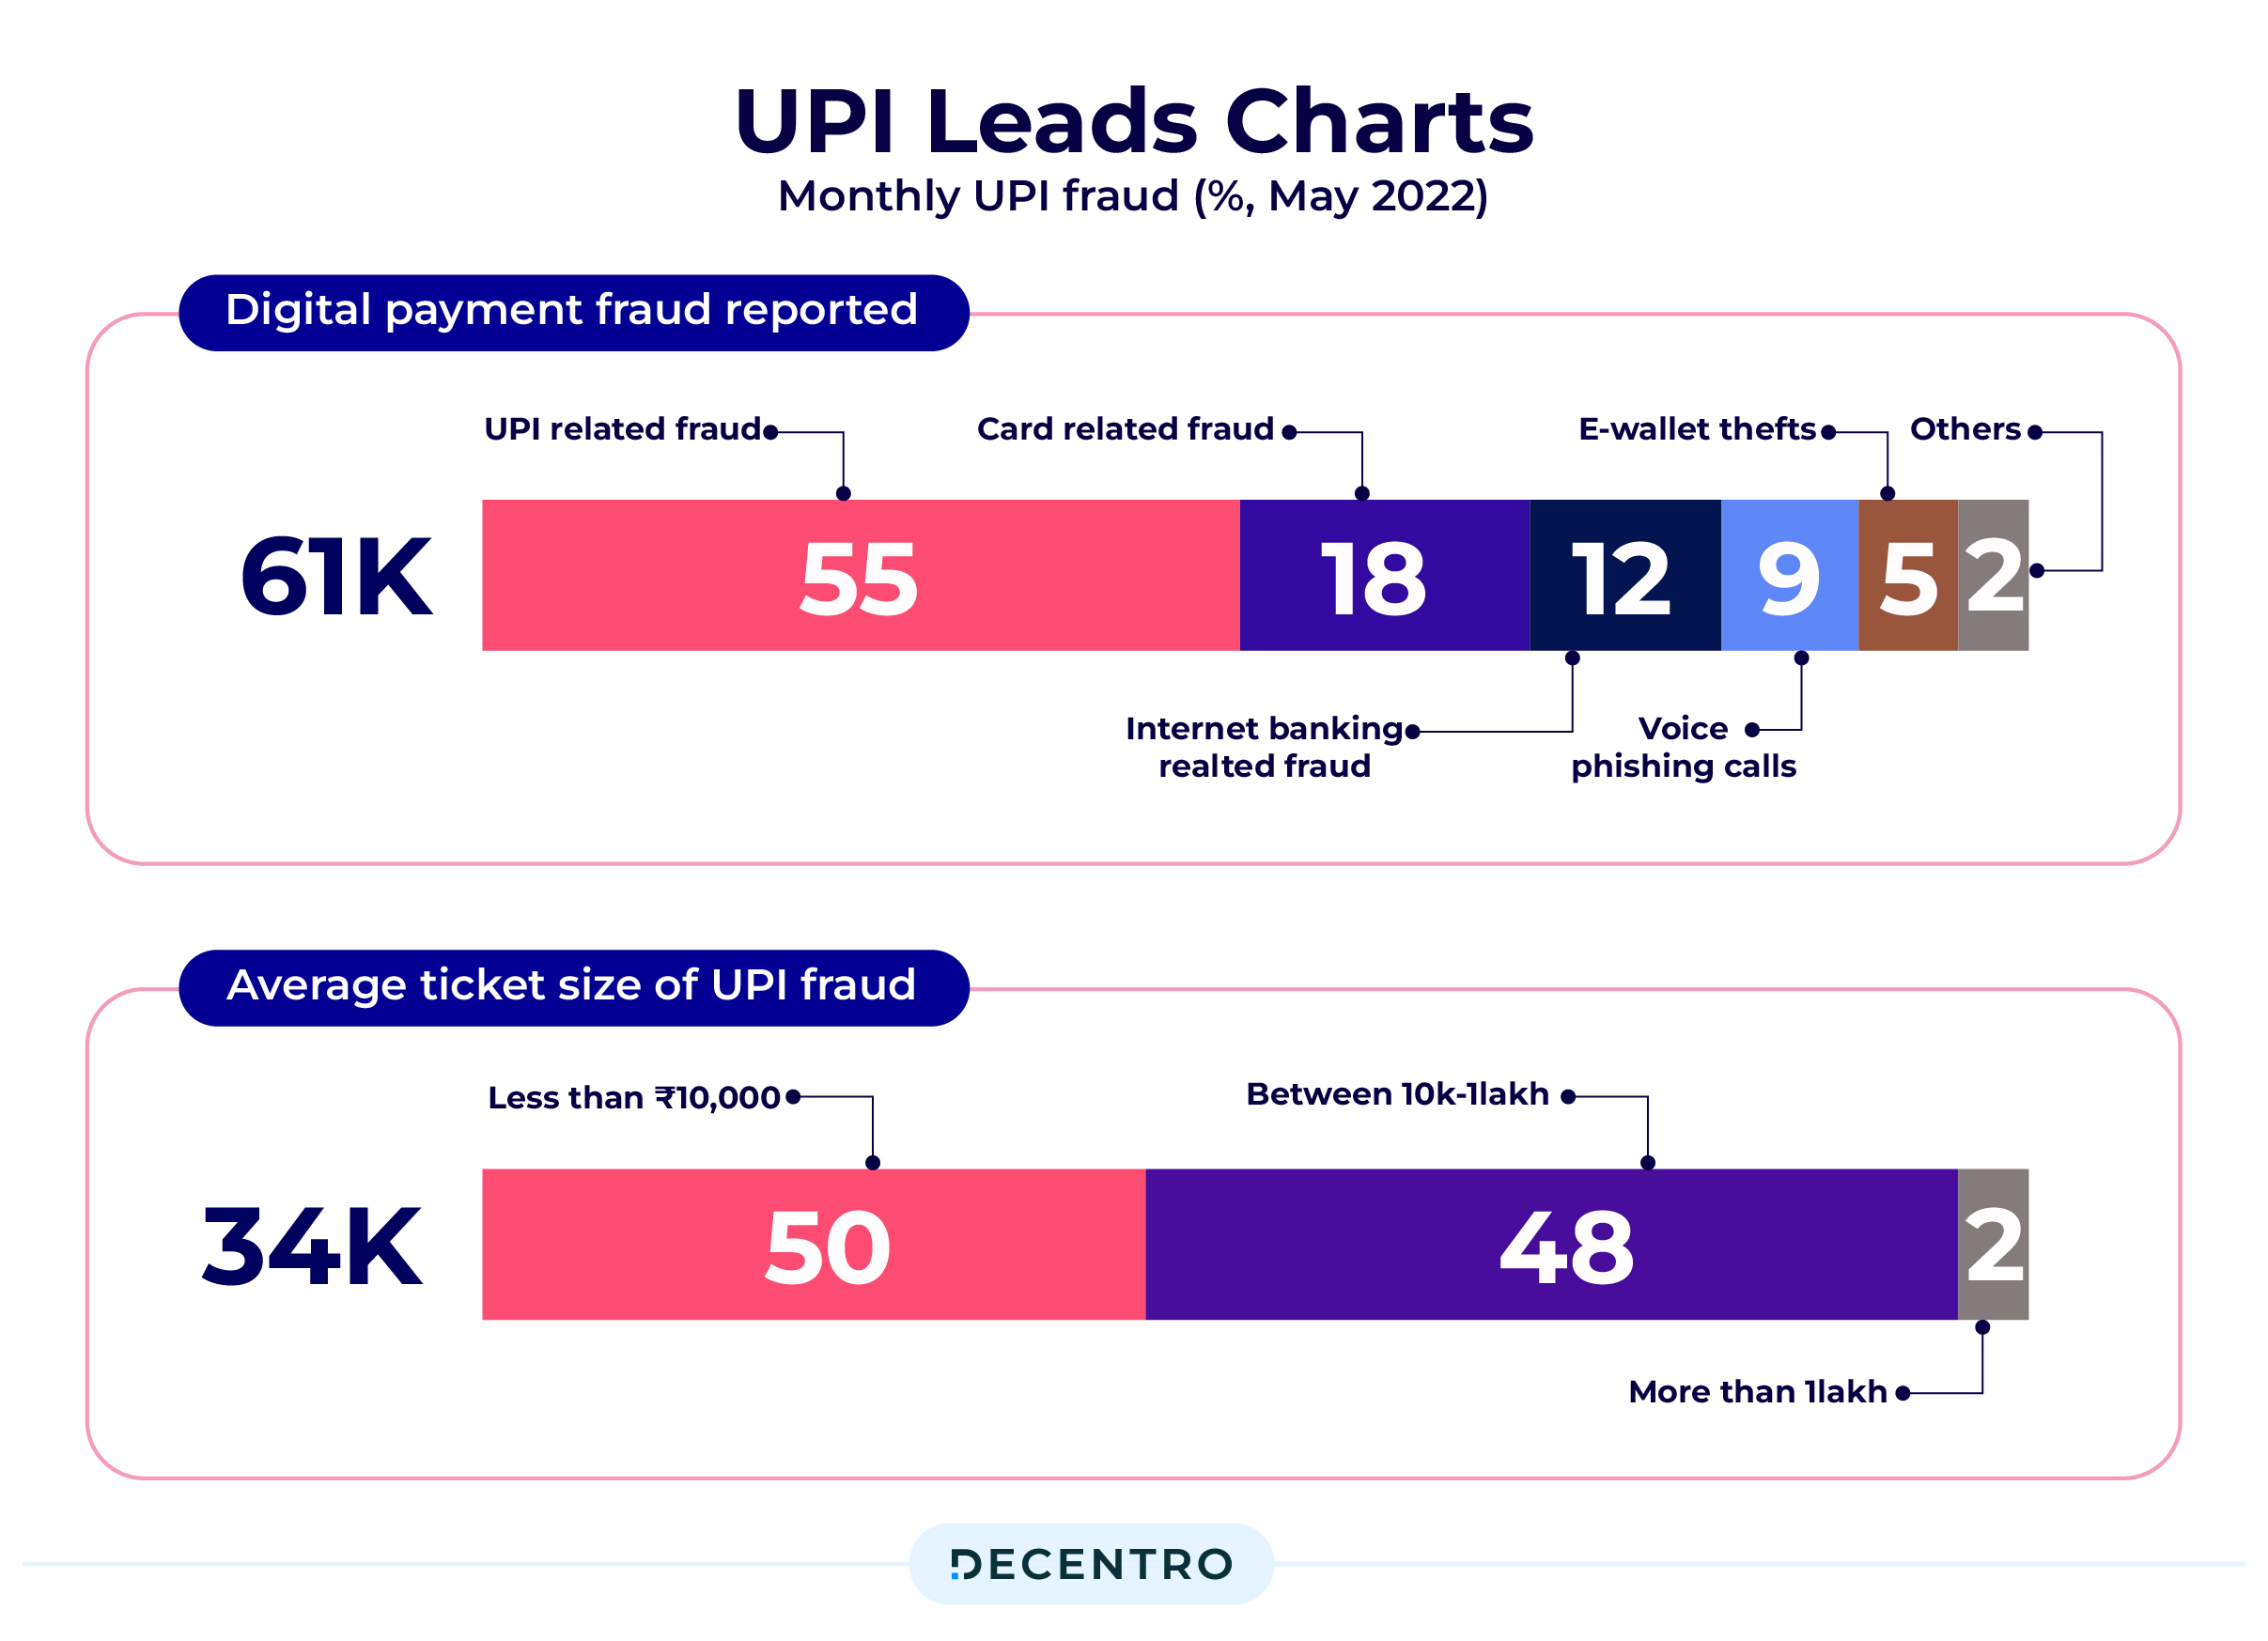 Monthly UPI % fraud loss as of May'22